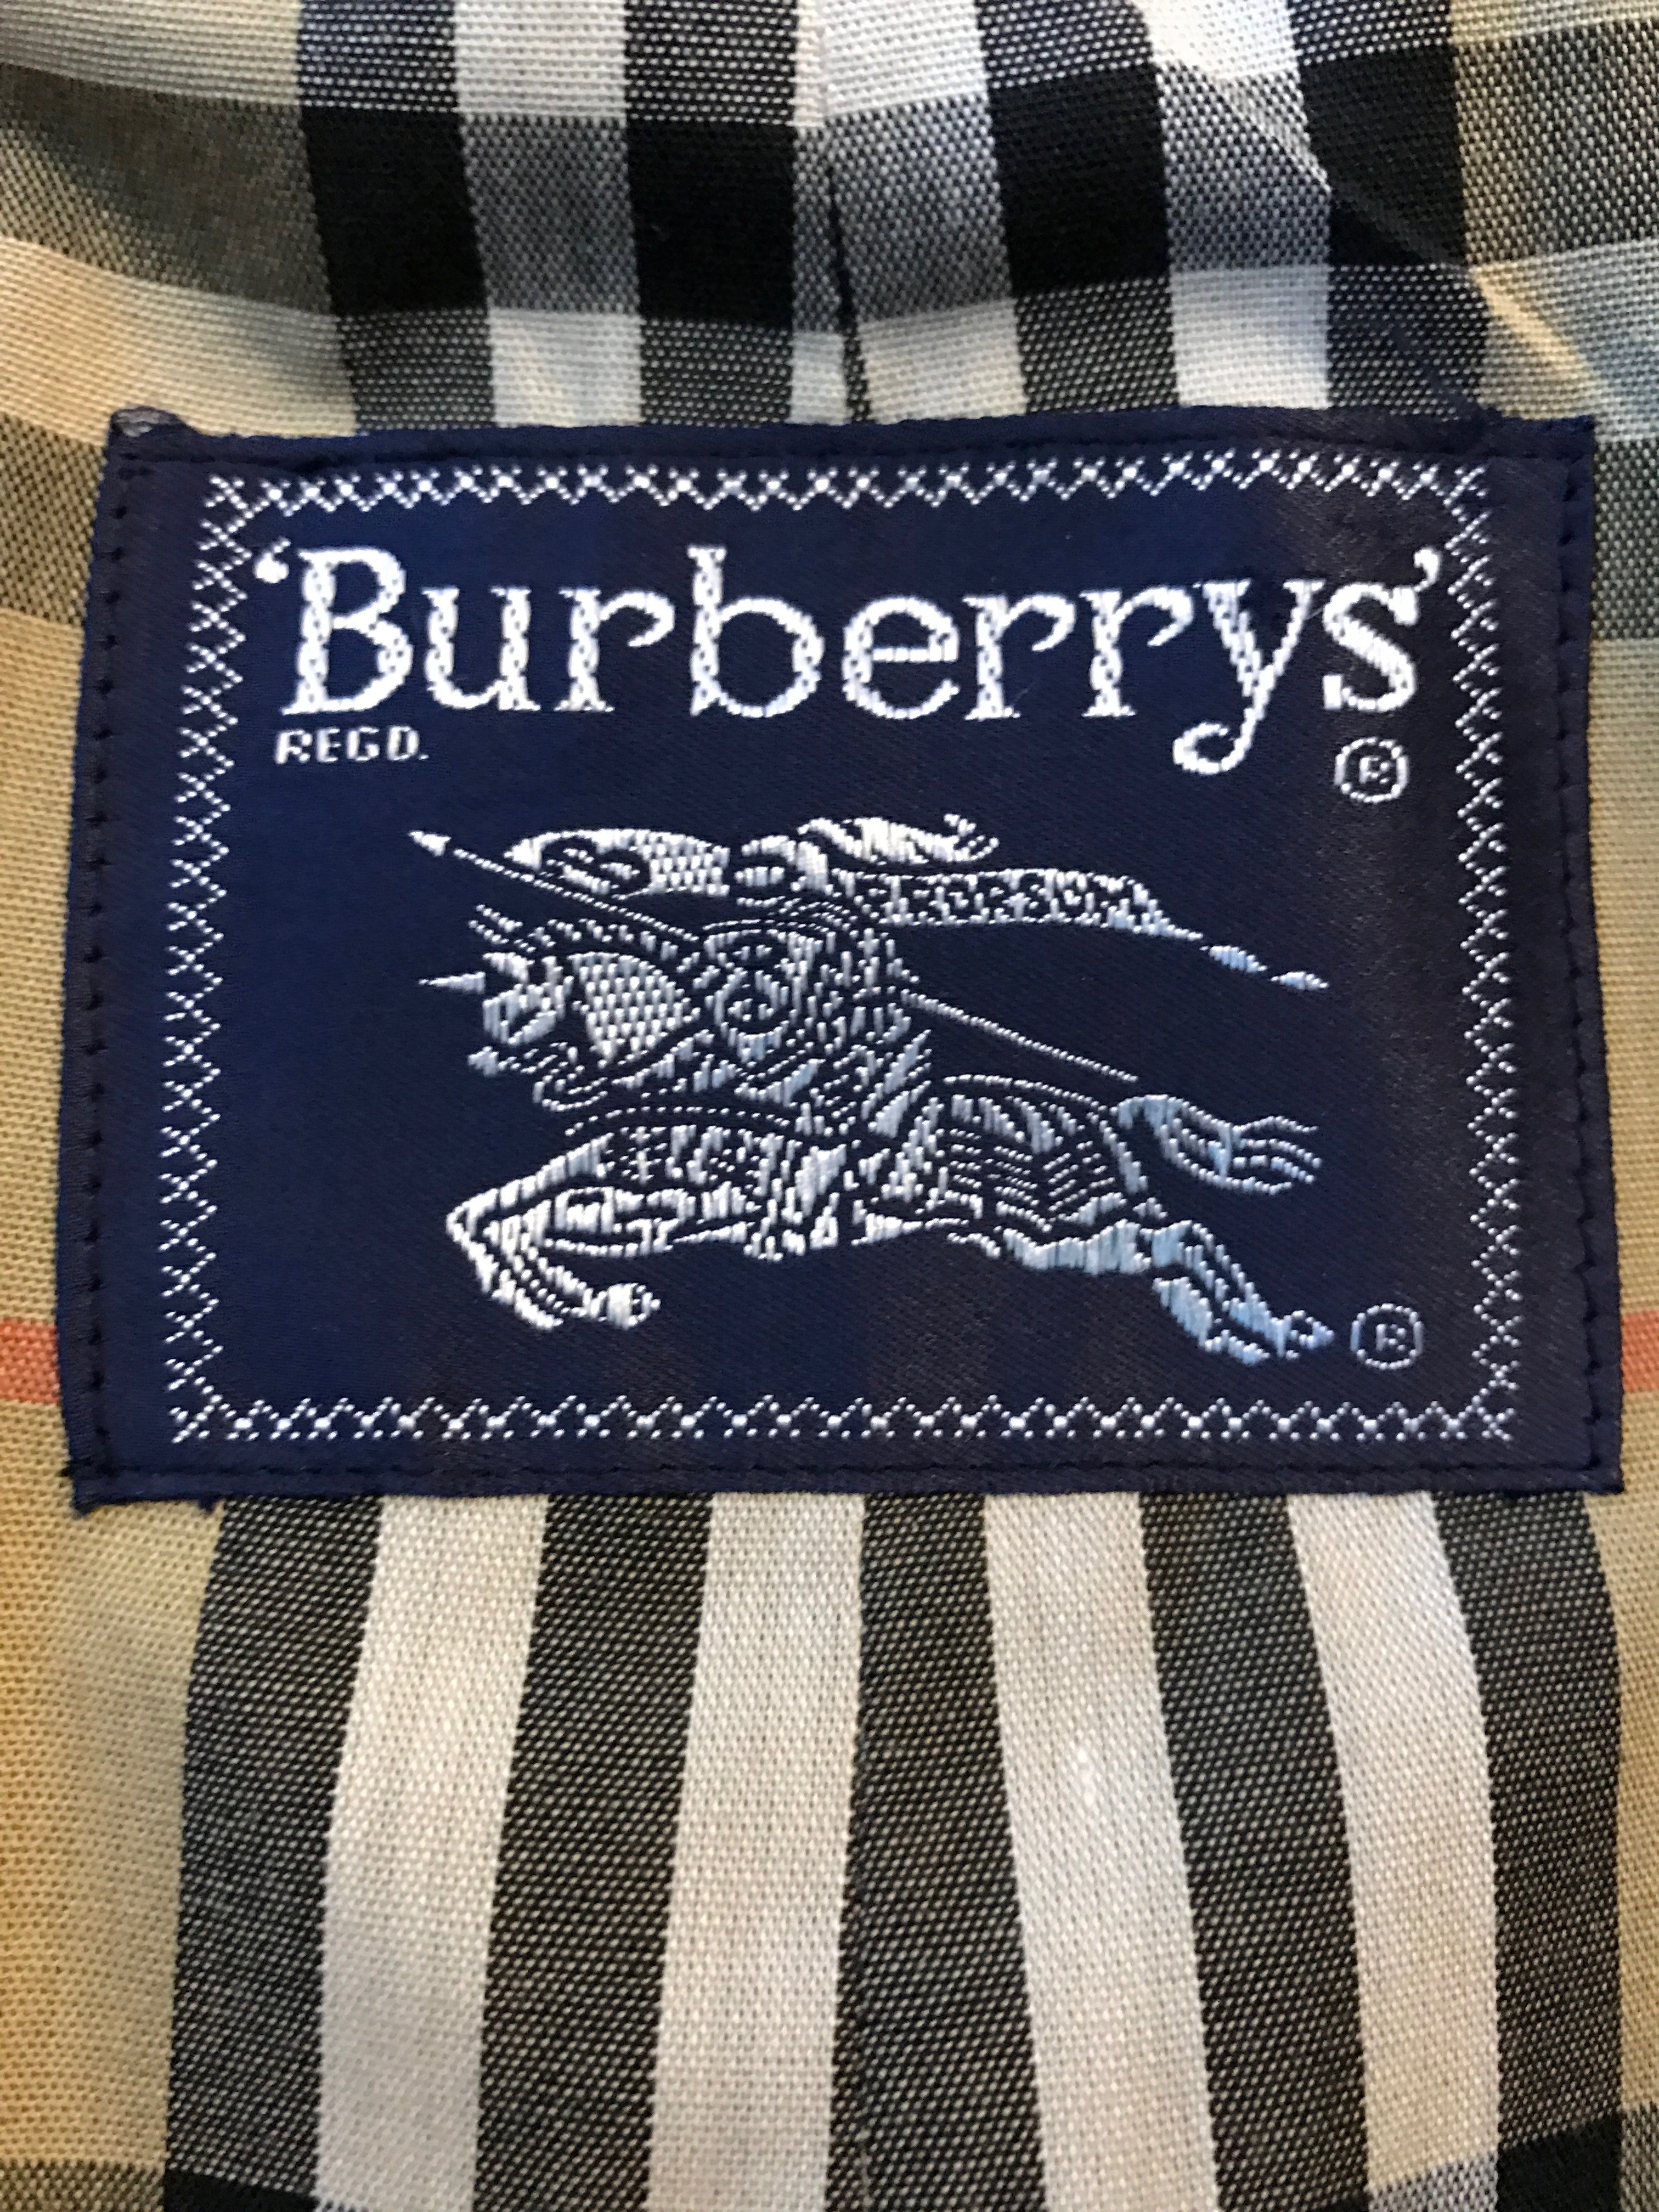 burberry made in england tag